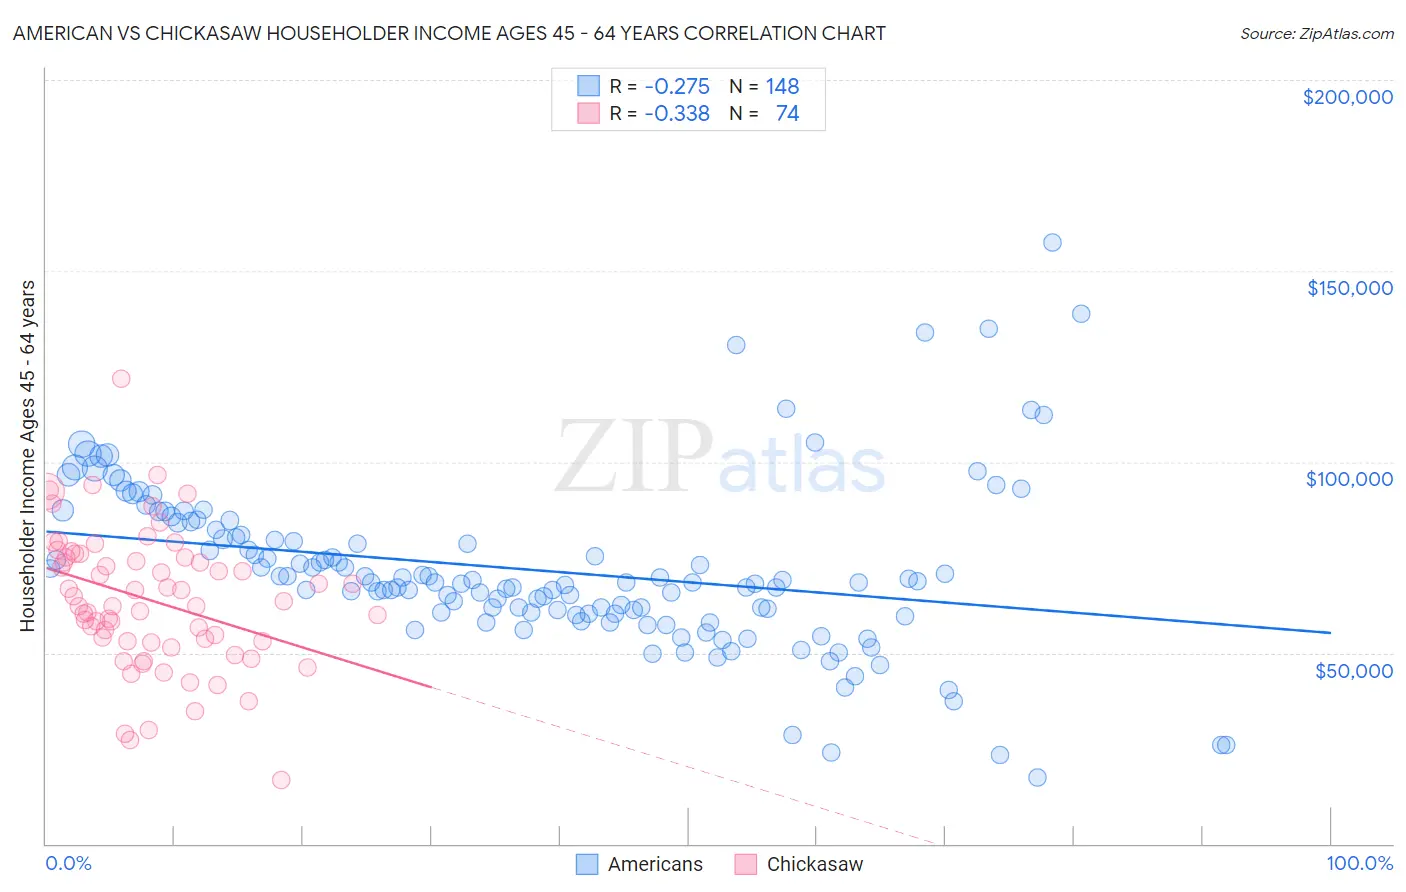 American vs Chickasaw Householder Income Ages 45 - 64 years